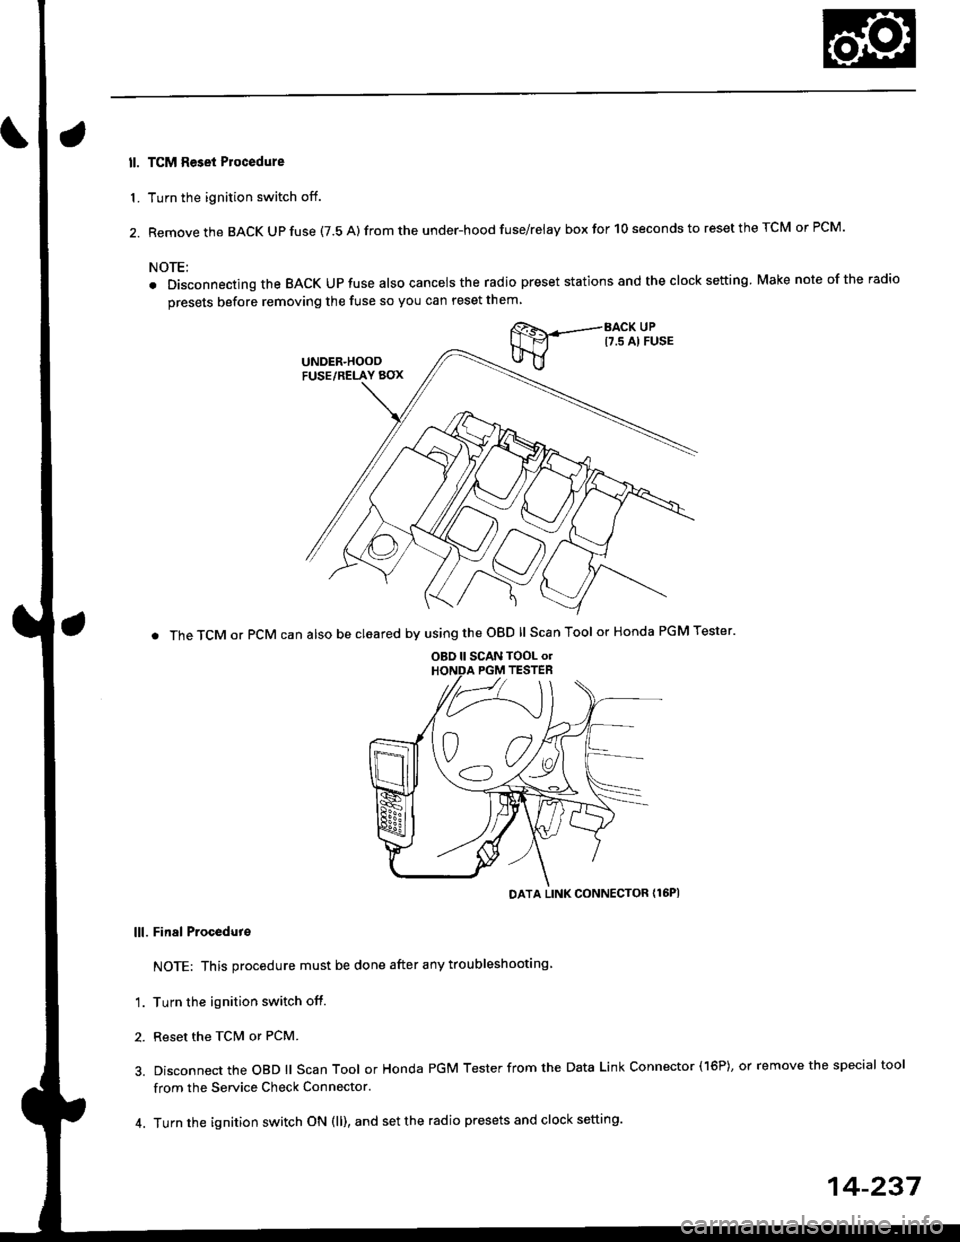 HONDA CIVIC 1997 6.G Workshop Manual ll. TCM Reset Plocedure
1. Turn the ignition switch off.
2. Remove the BACK Up fuse (7.5 A) from the under-hood fuse/relay box for 10 seconds to reset the TCM or PCM.
NOTE:
. Disconnecting the BACK UP